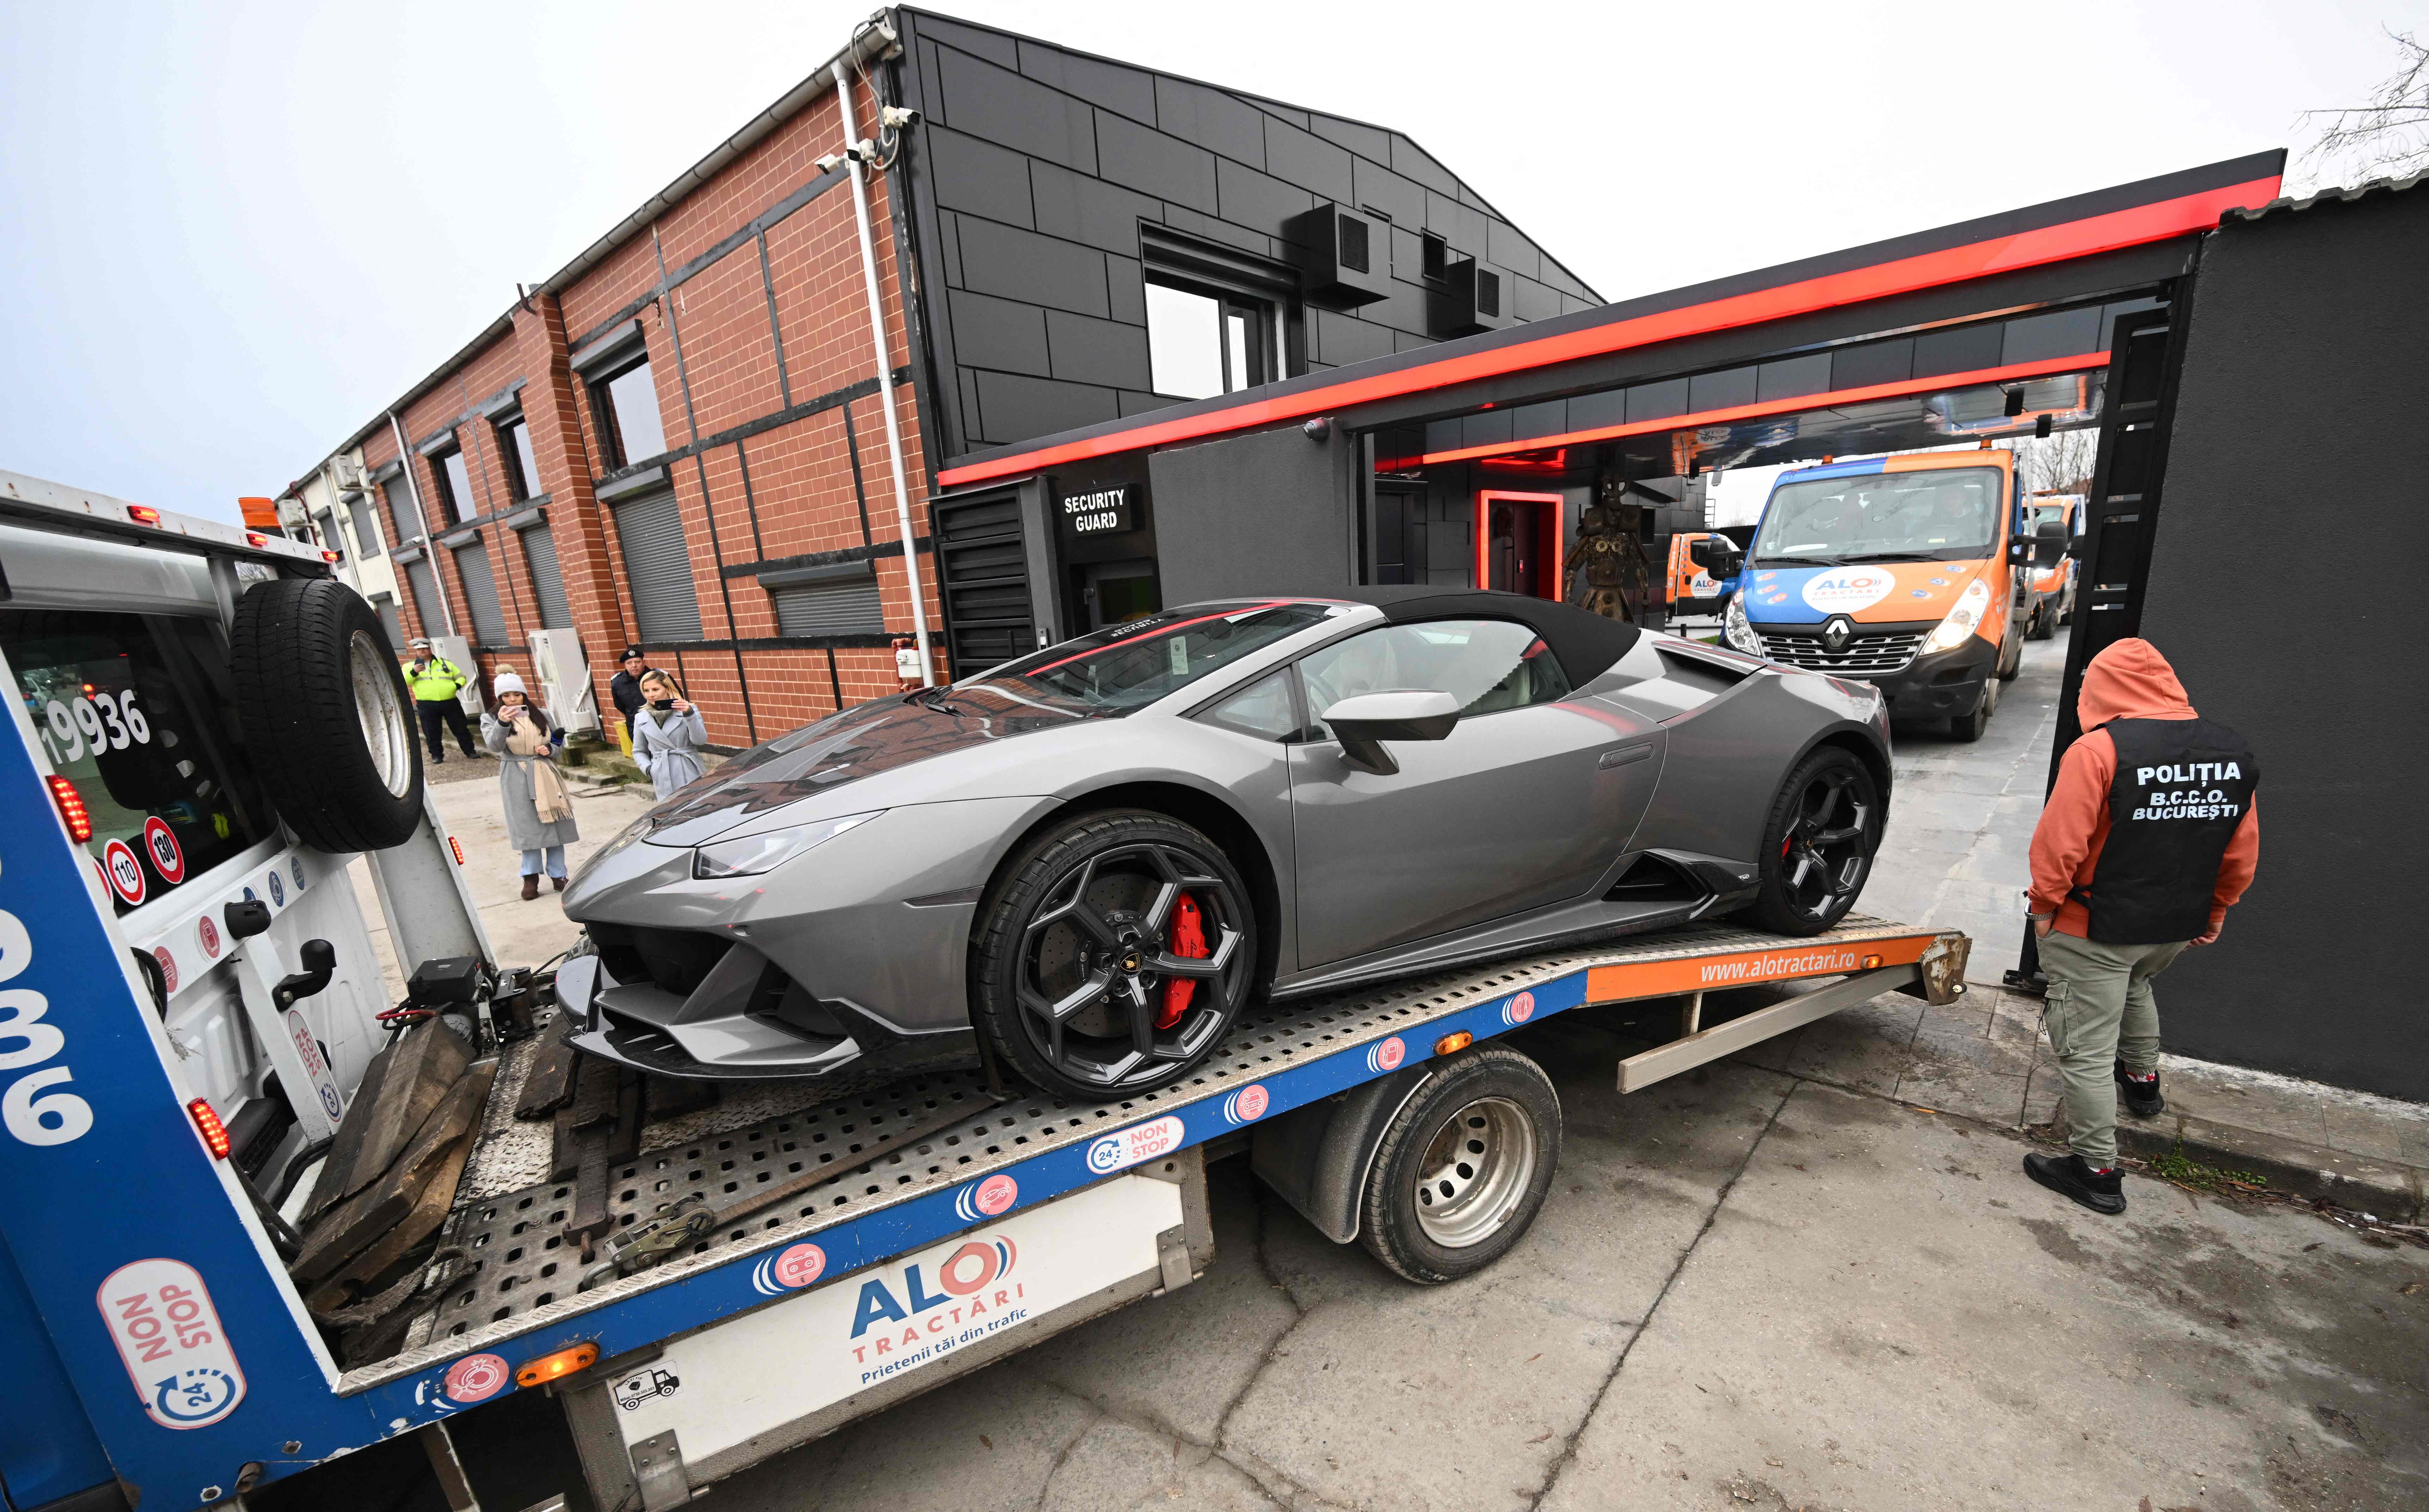 One of Andrew Tate’s many luxury cars is loaded onto a flatbed and taken away